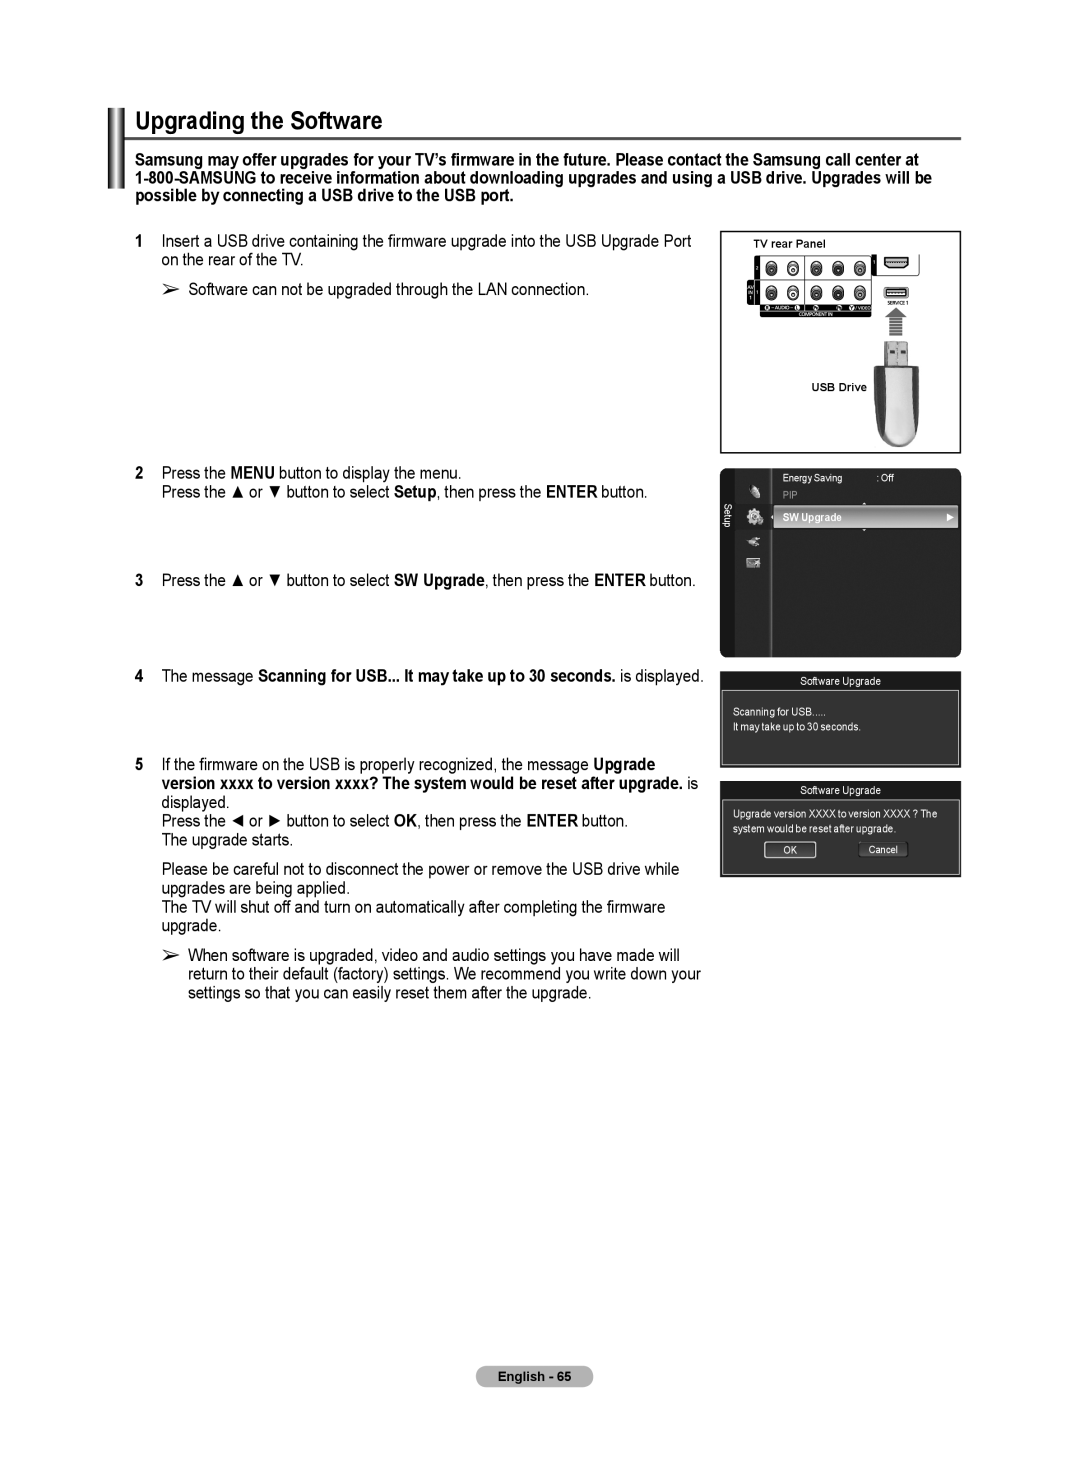 Samsung 510 user manual Upgrading the Software, TV rear Panel USB Drive 